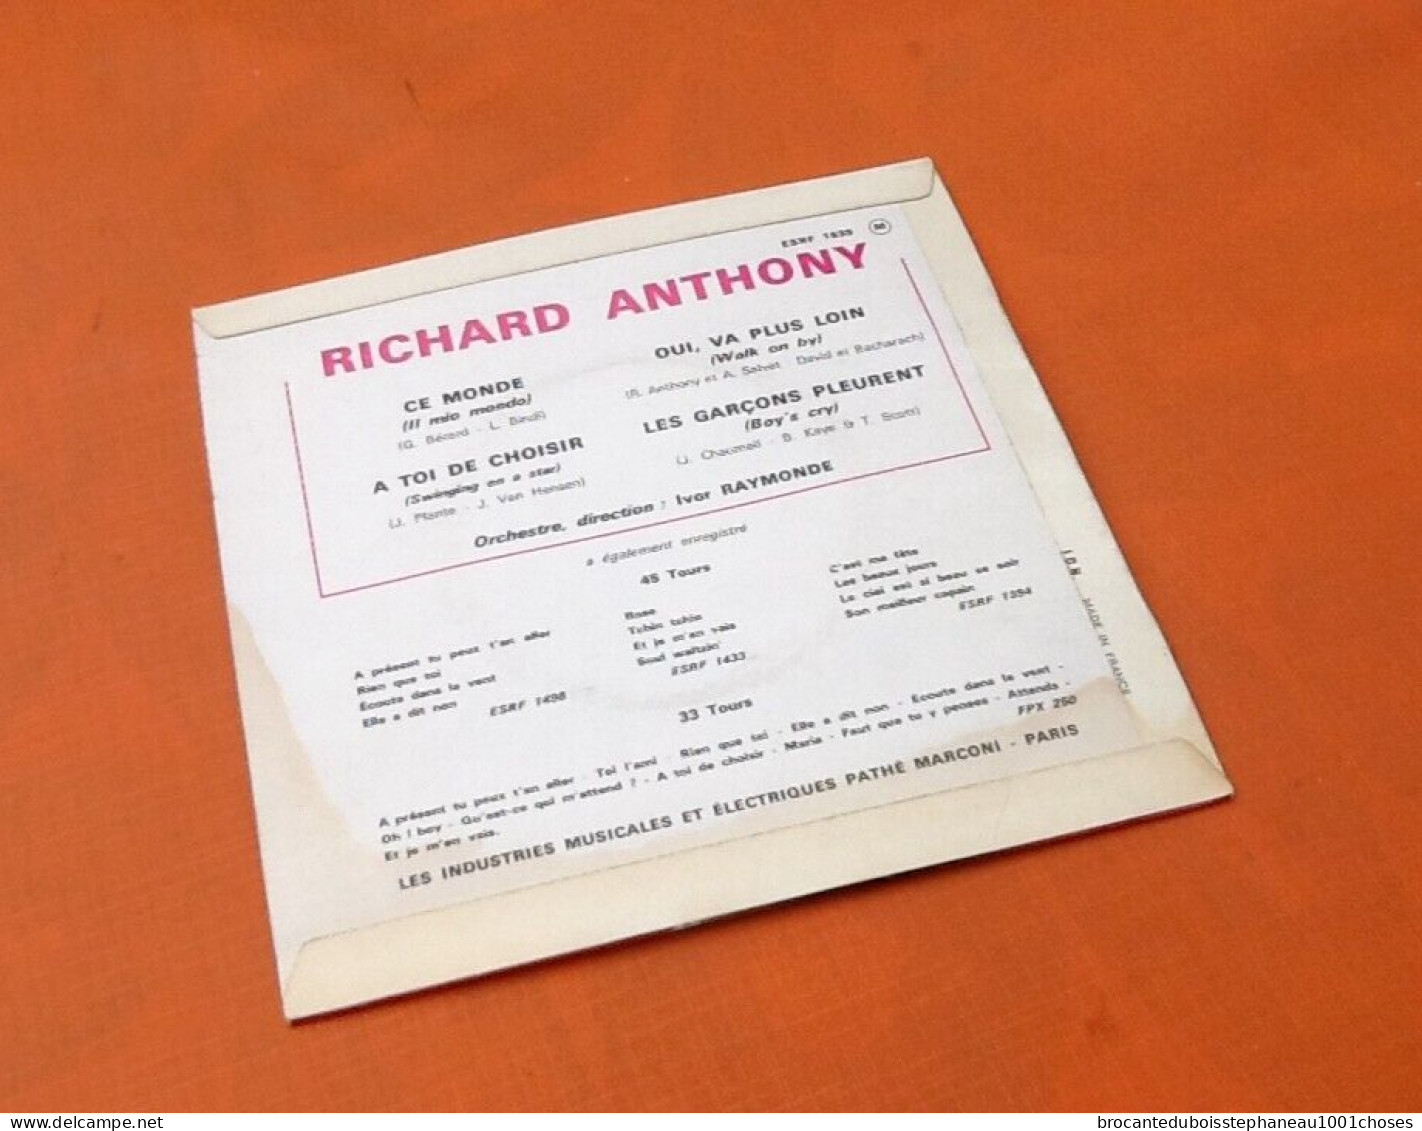 Vinyle 45 Tours Richard Anthony Ce Monde (1964) - Other - French Music